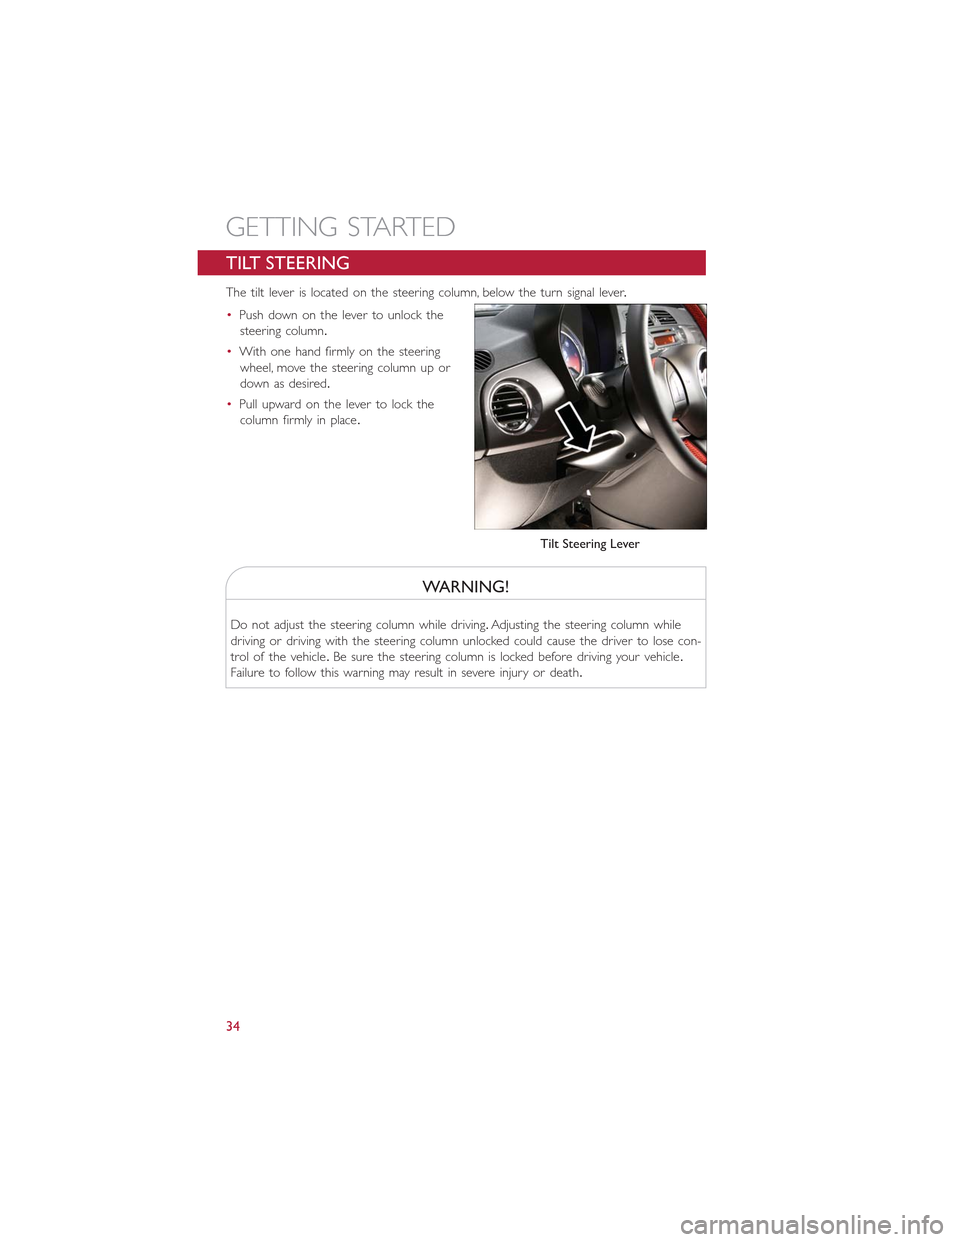 FIAT 500E 2015 2.G User Guide TILT STEERING
The tilt lever is located on the steering column, below the turn signal lever.
•Push down on the lever to unlock the
steering column.
•With one hand firmly on the steering
wheel, mov